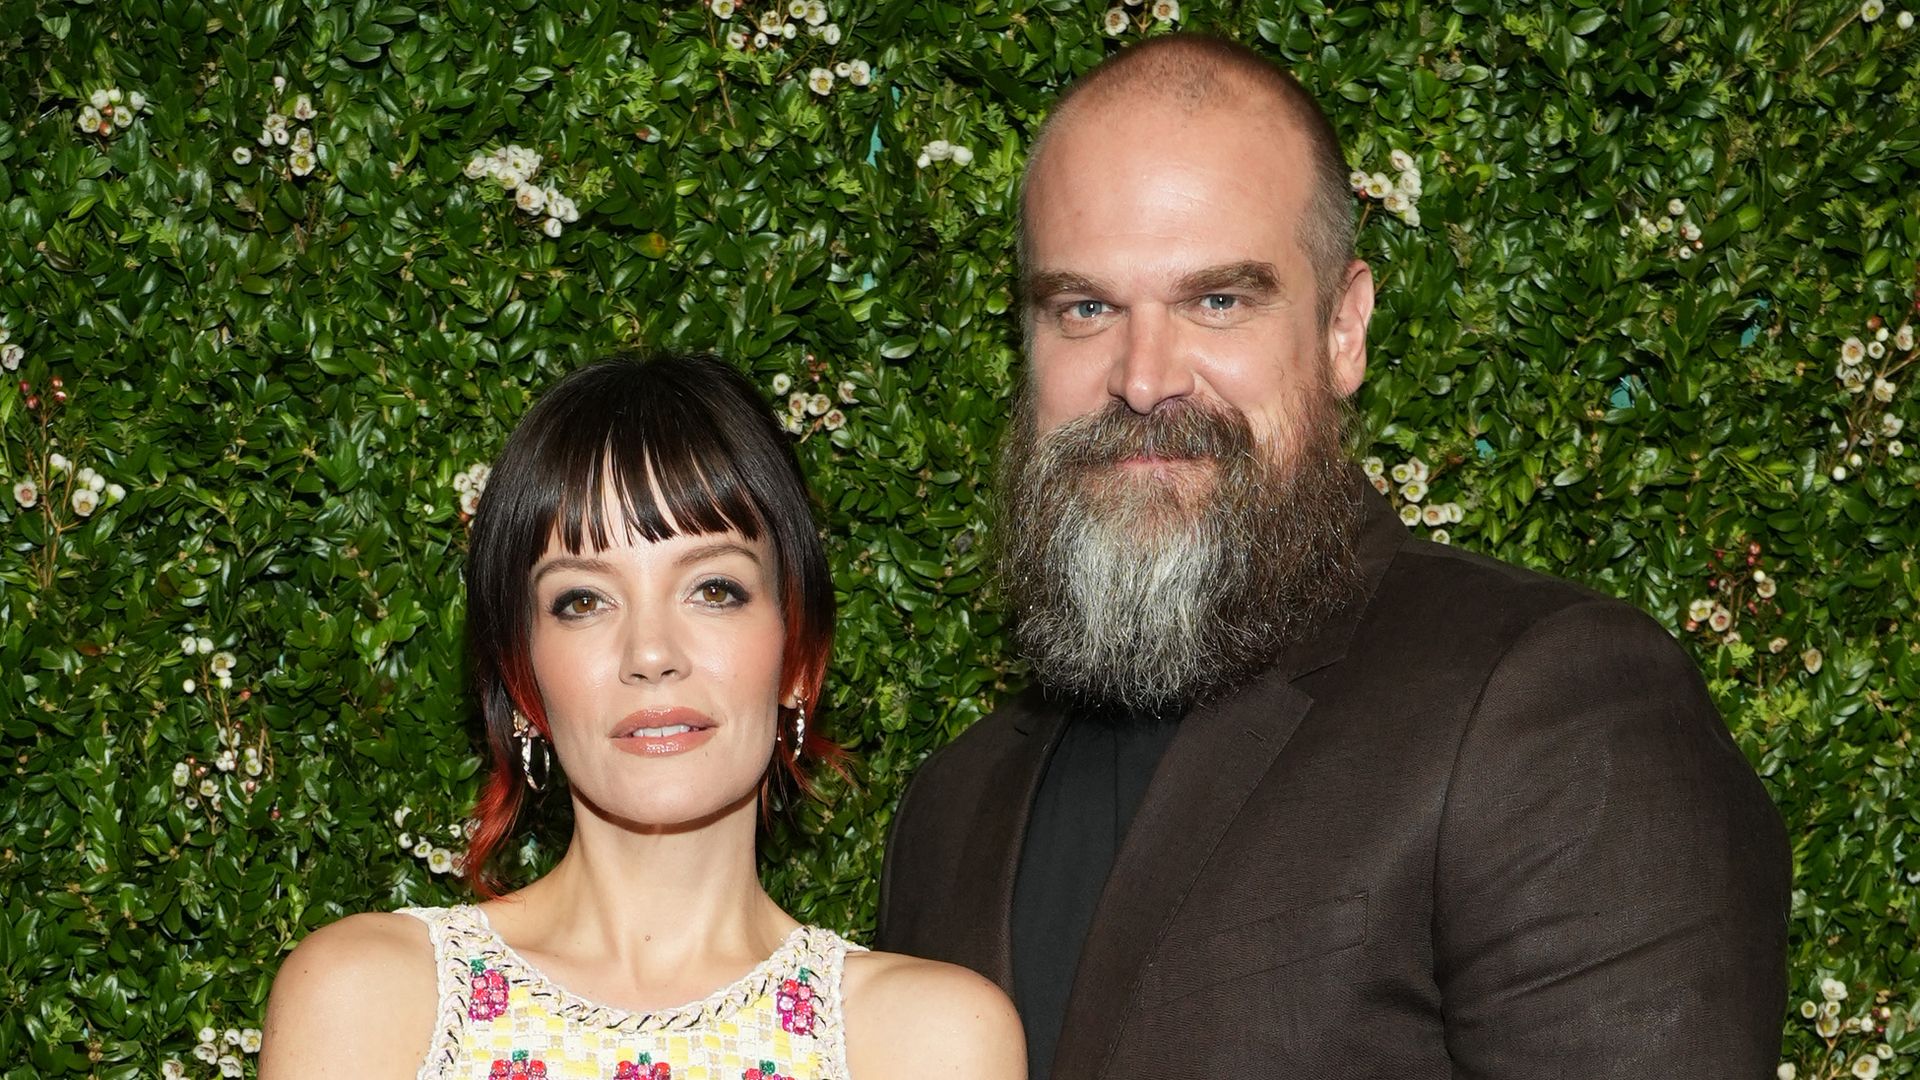 Lily Allen makes rare appearance with husband David Harbour